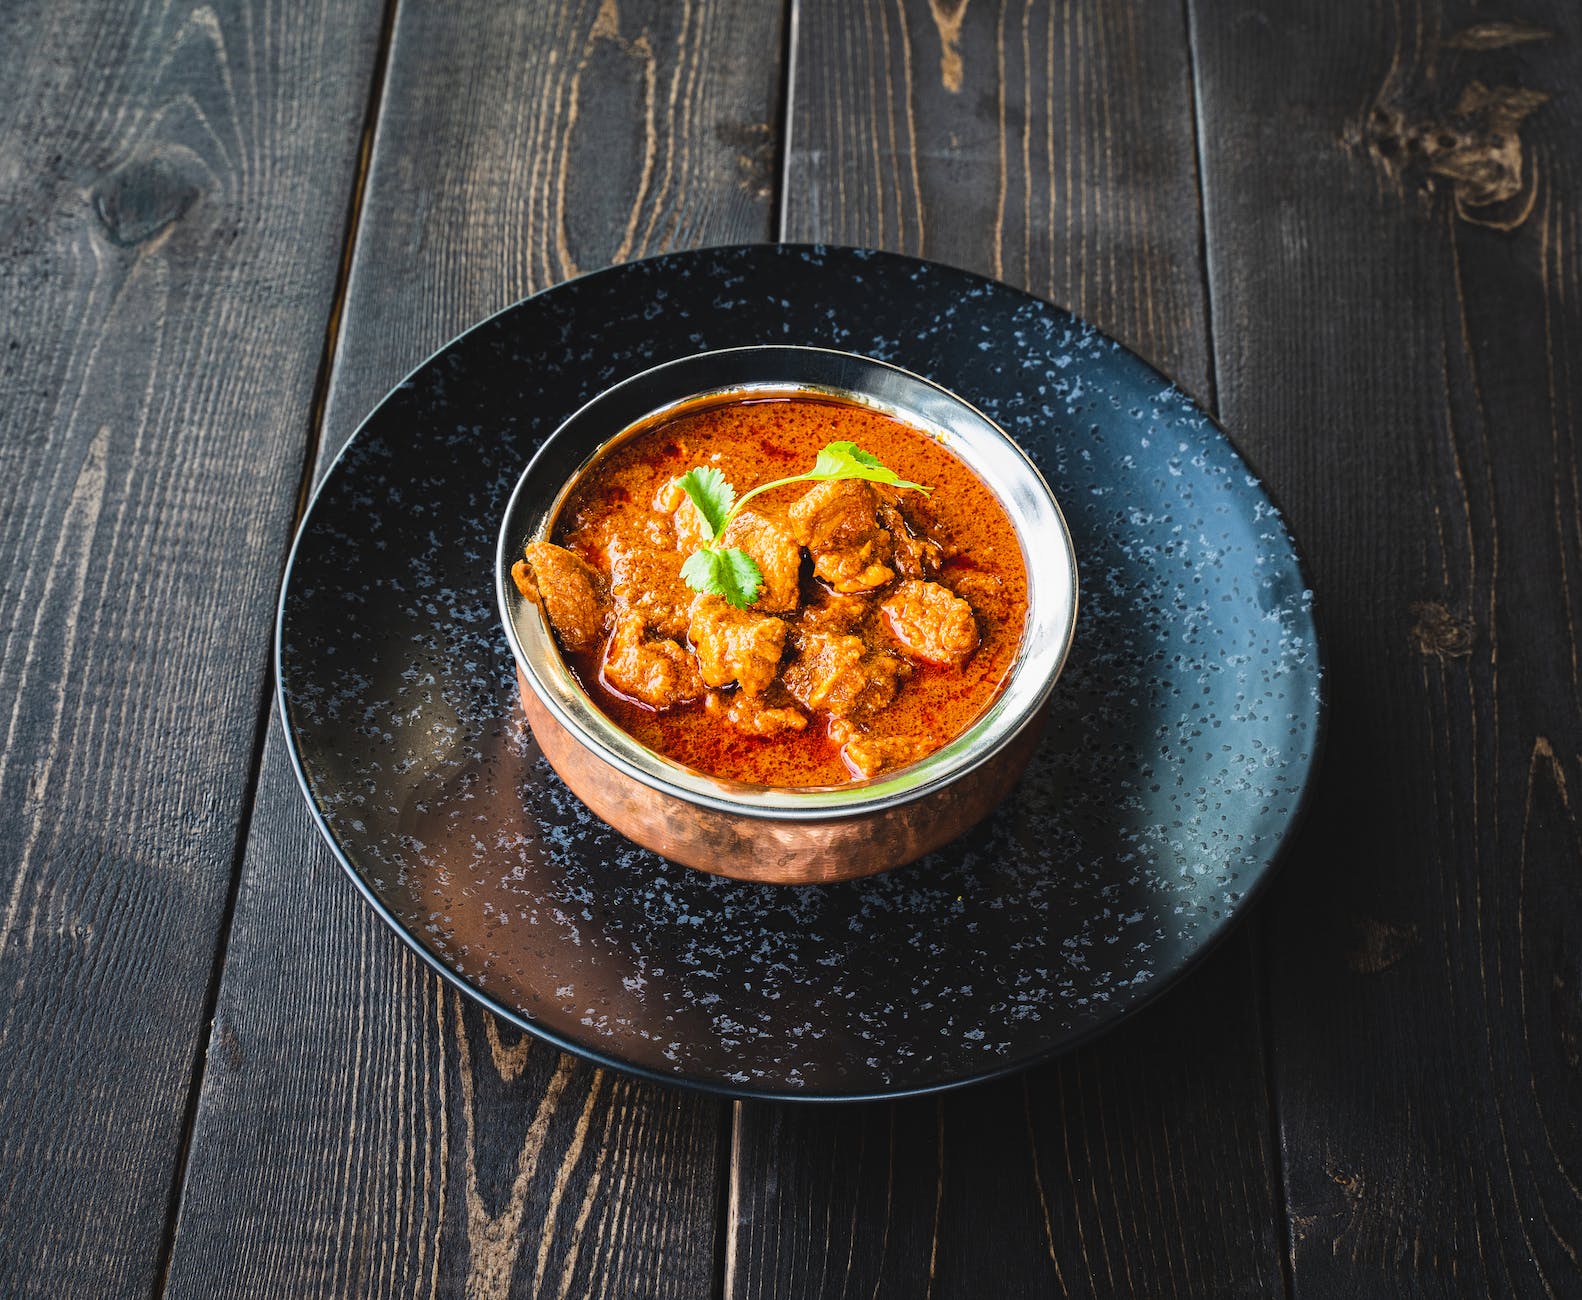 a bowl of curry on a wooden surface